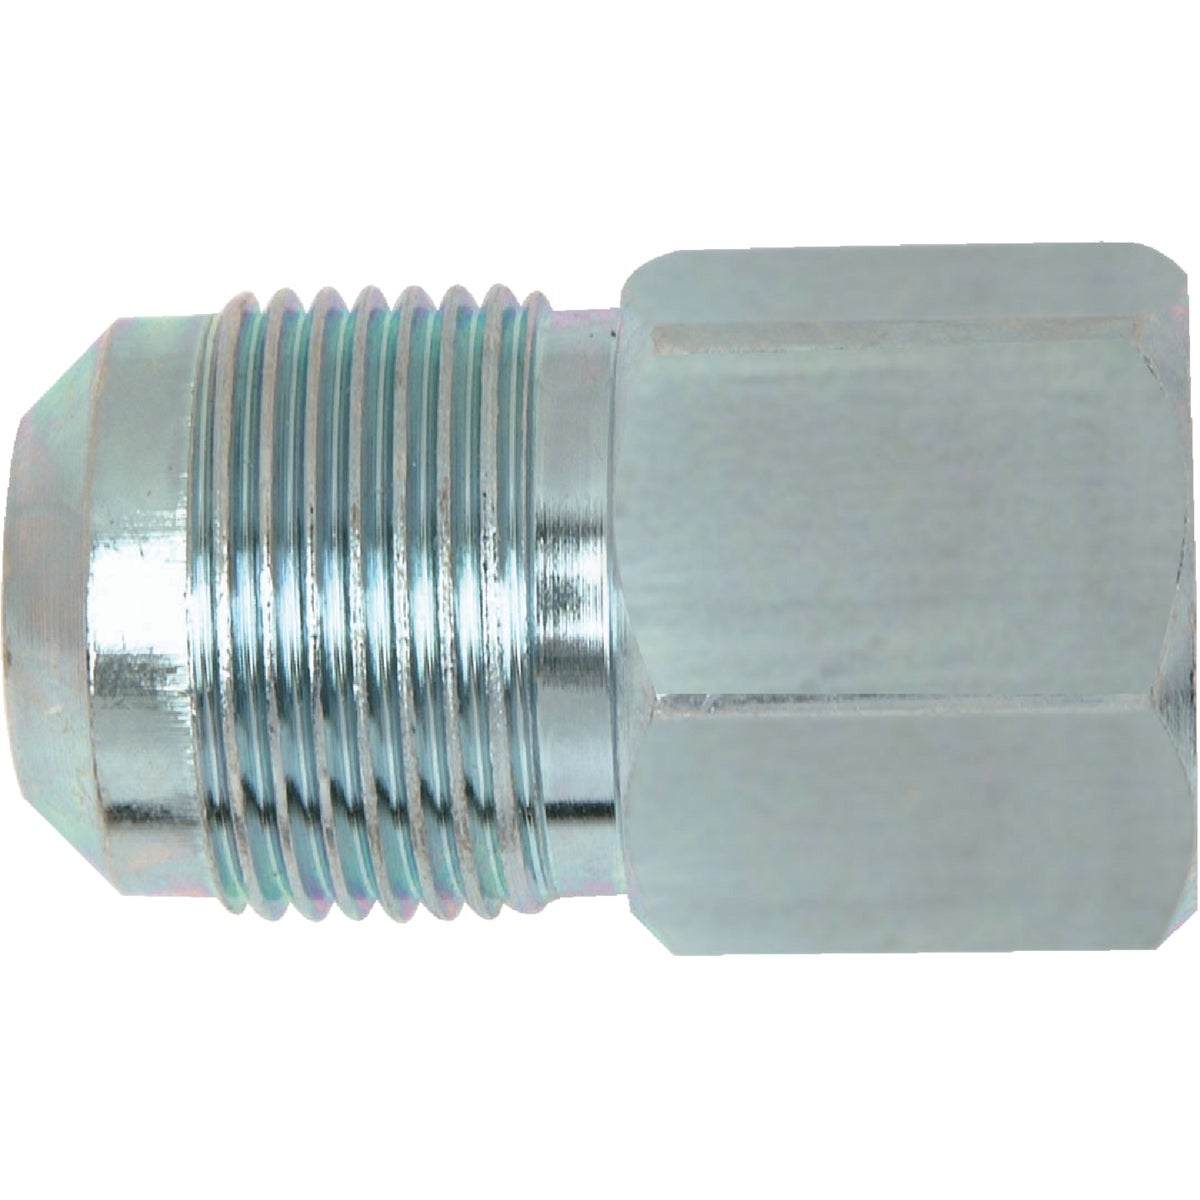 Dormont 5/8 In. OD Flare x 1/2 In. FIP Zinc-Plated Carbon Steel Adapter Gas Fitting